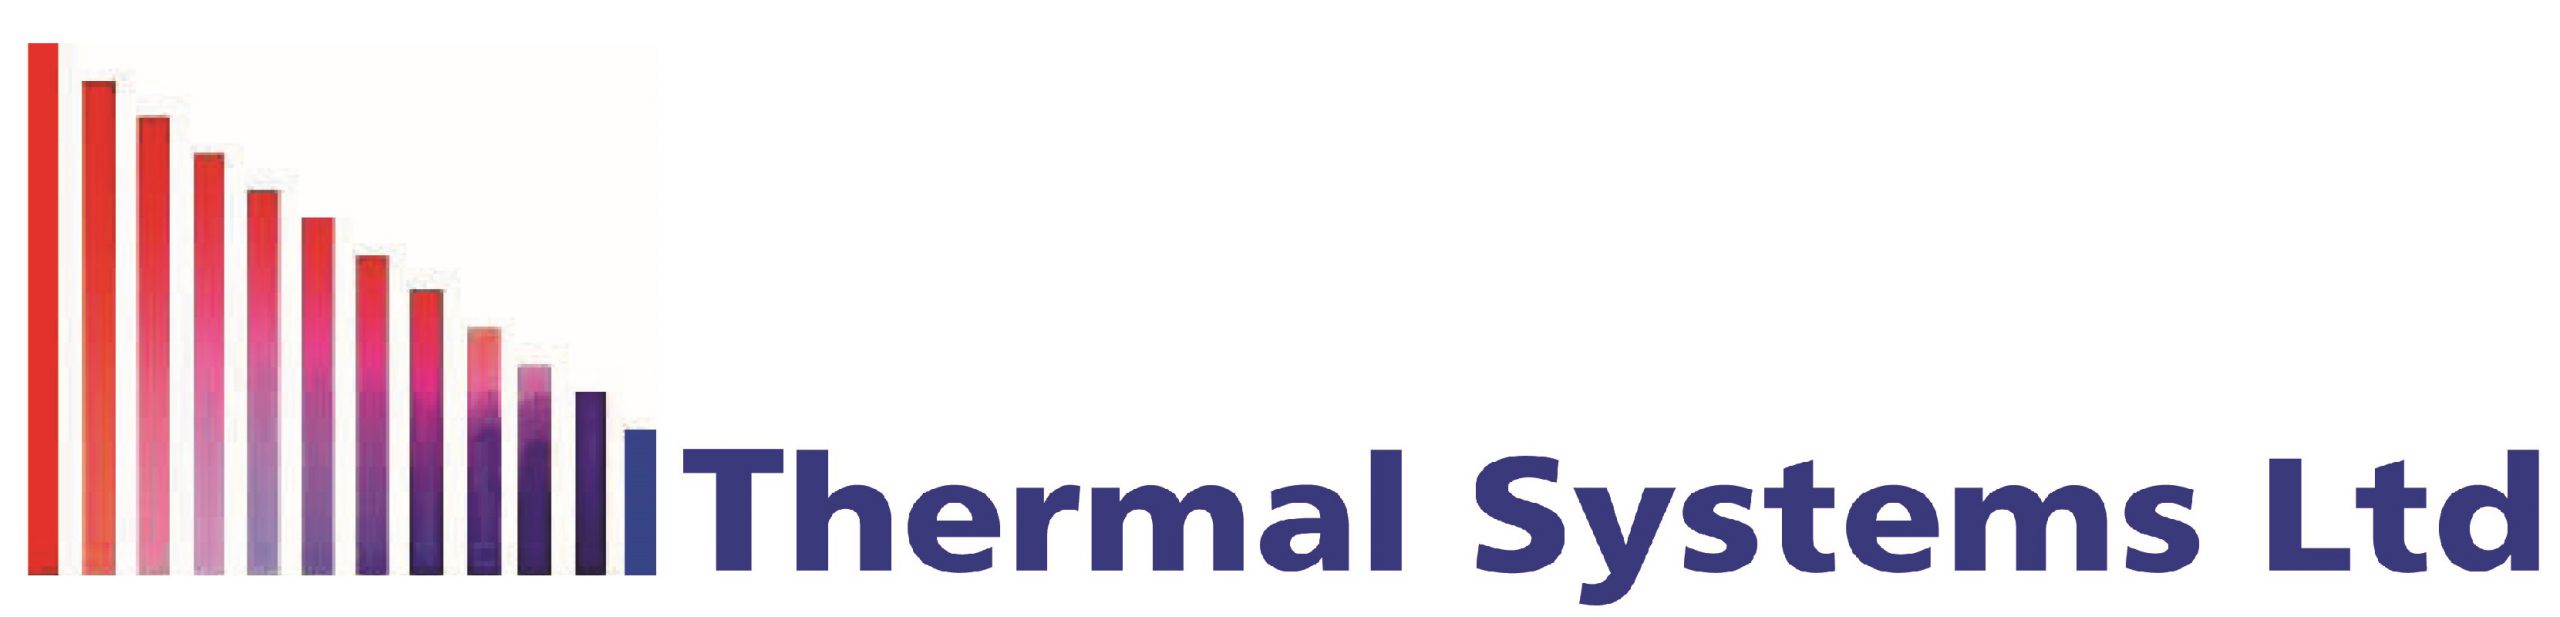 Thermal systems icespy logo